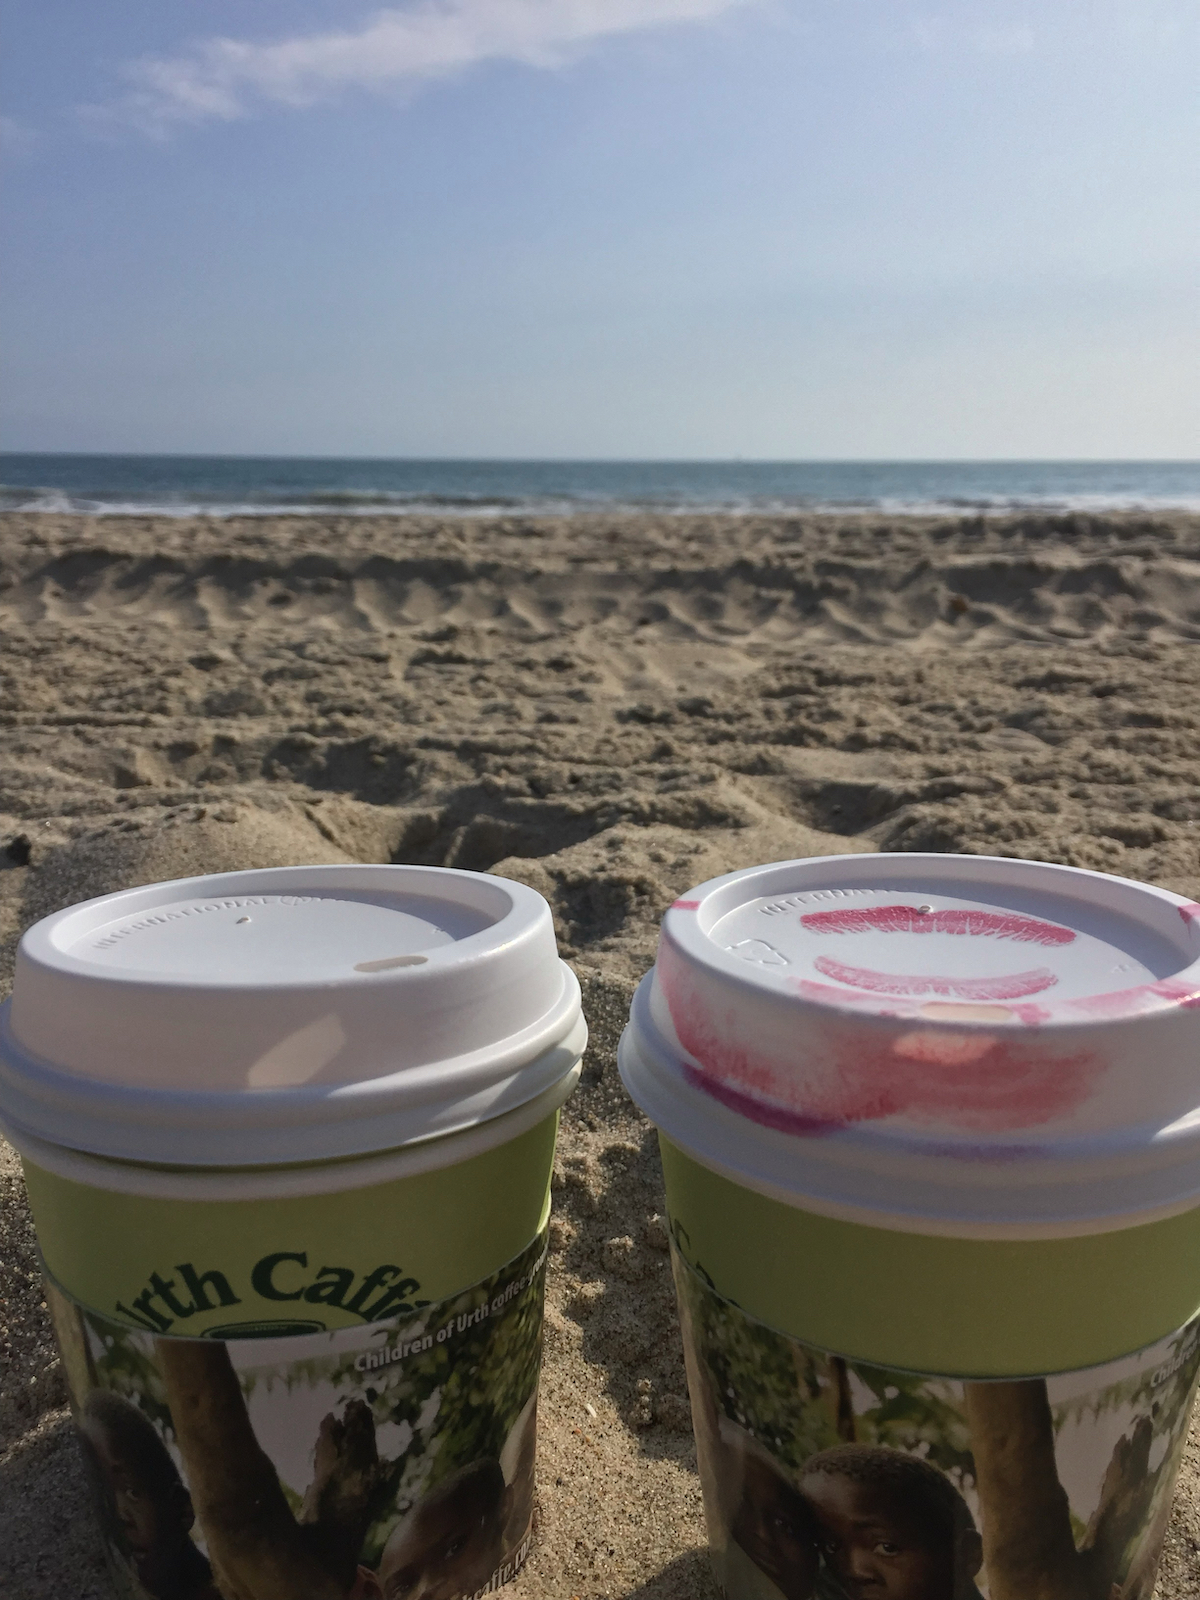 Two to go coffee cups, one lid stained with lipstick, at the beach